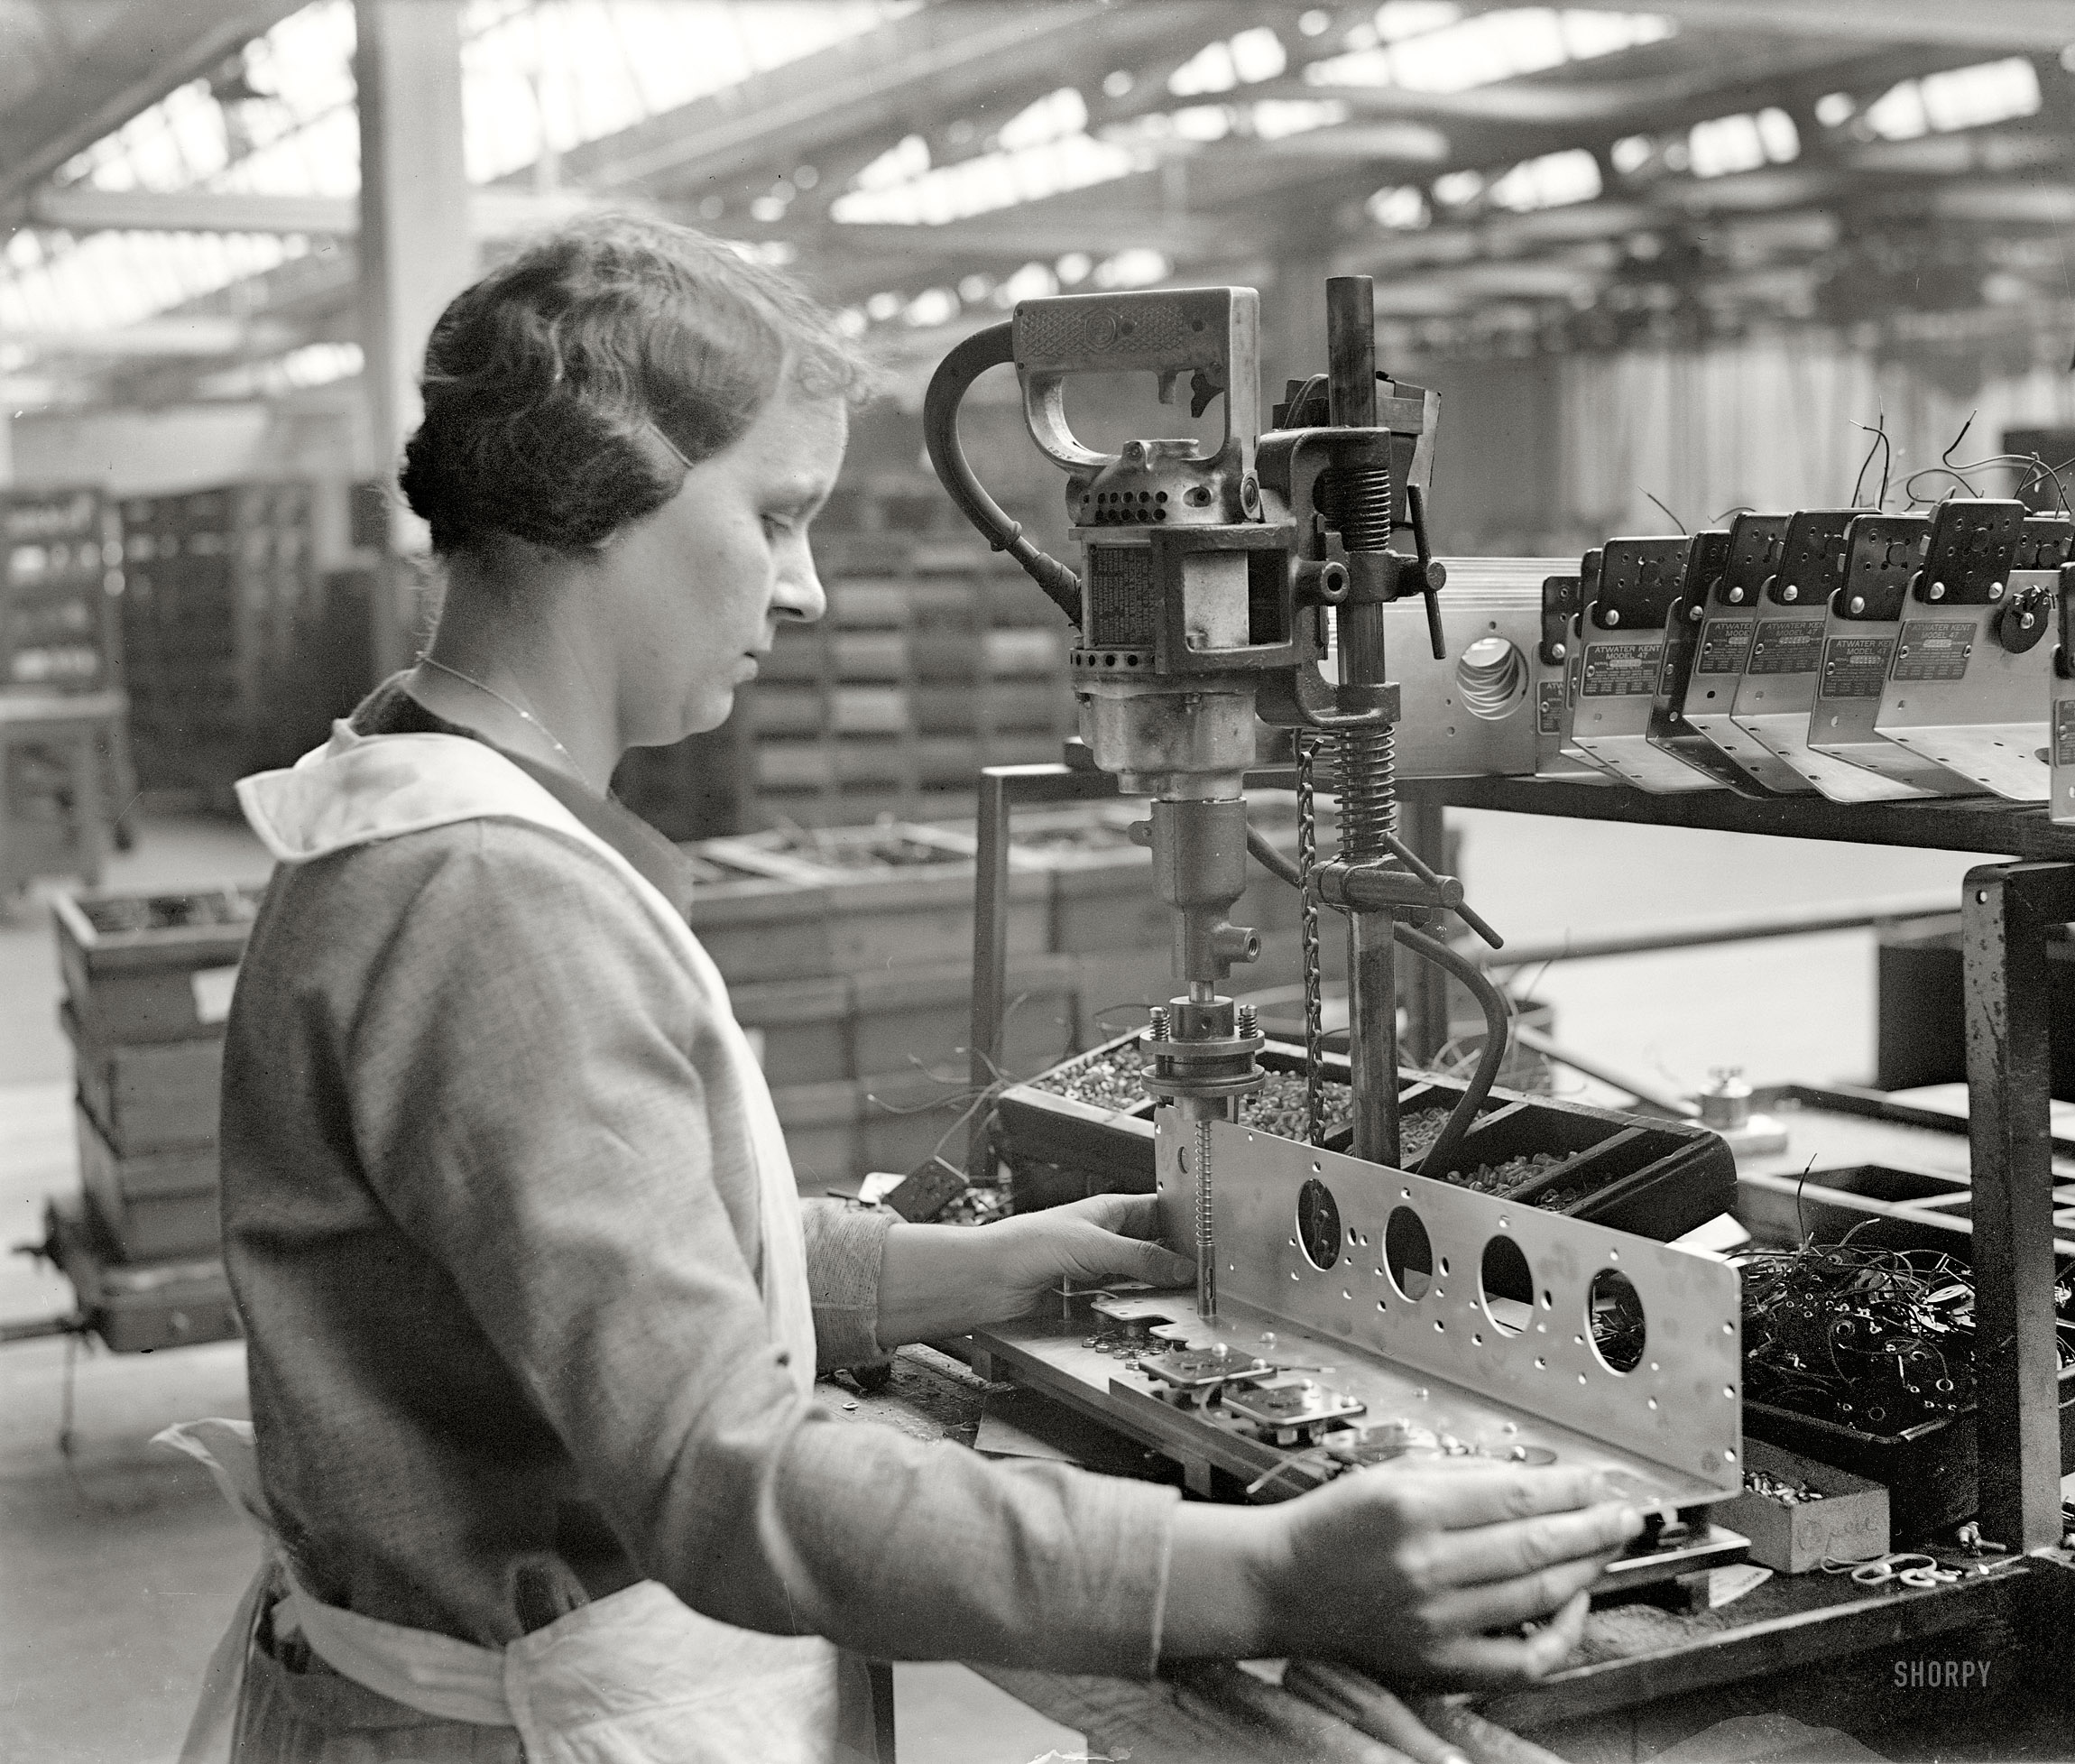 Philadelphia circa 1928. "Atwater Kent Factory for T.R. Shipp." Assembling the Atwater Kent Model 47, back when radios were the iPad of their day. National Photo Company Collection glass negative. View full size.